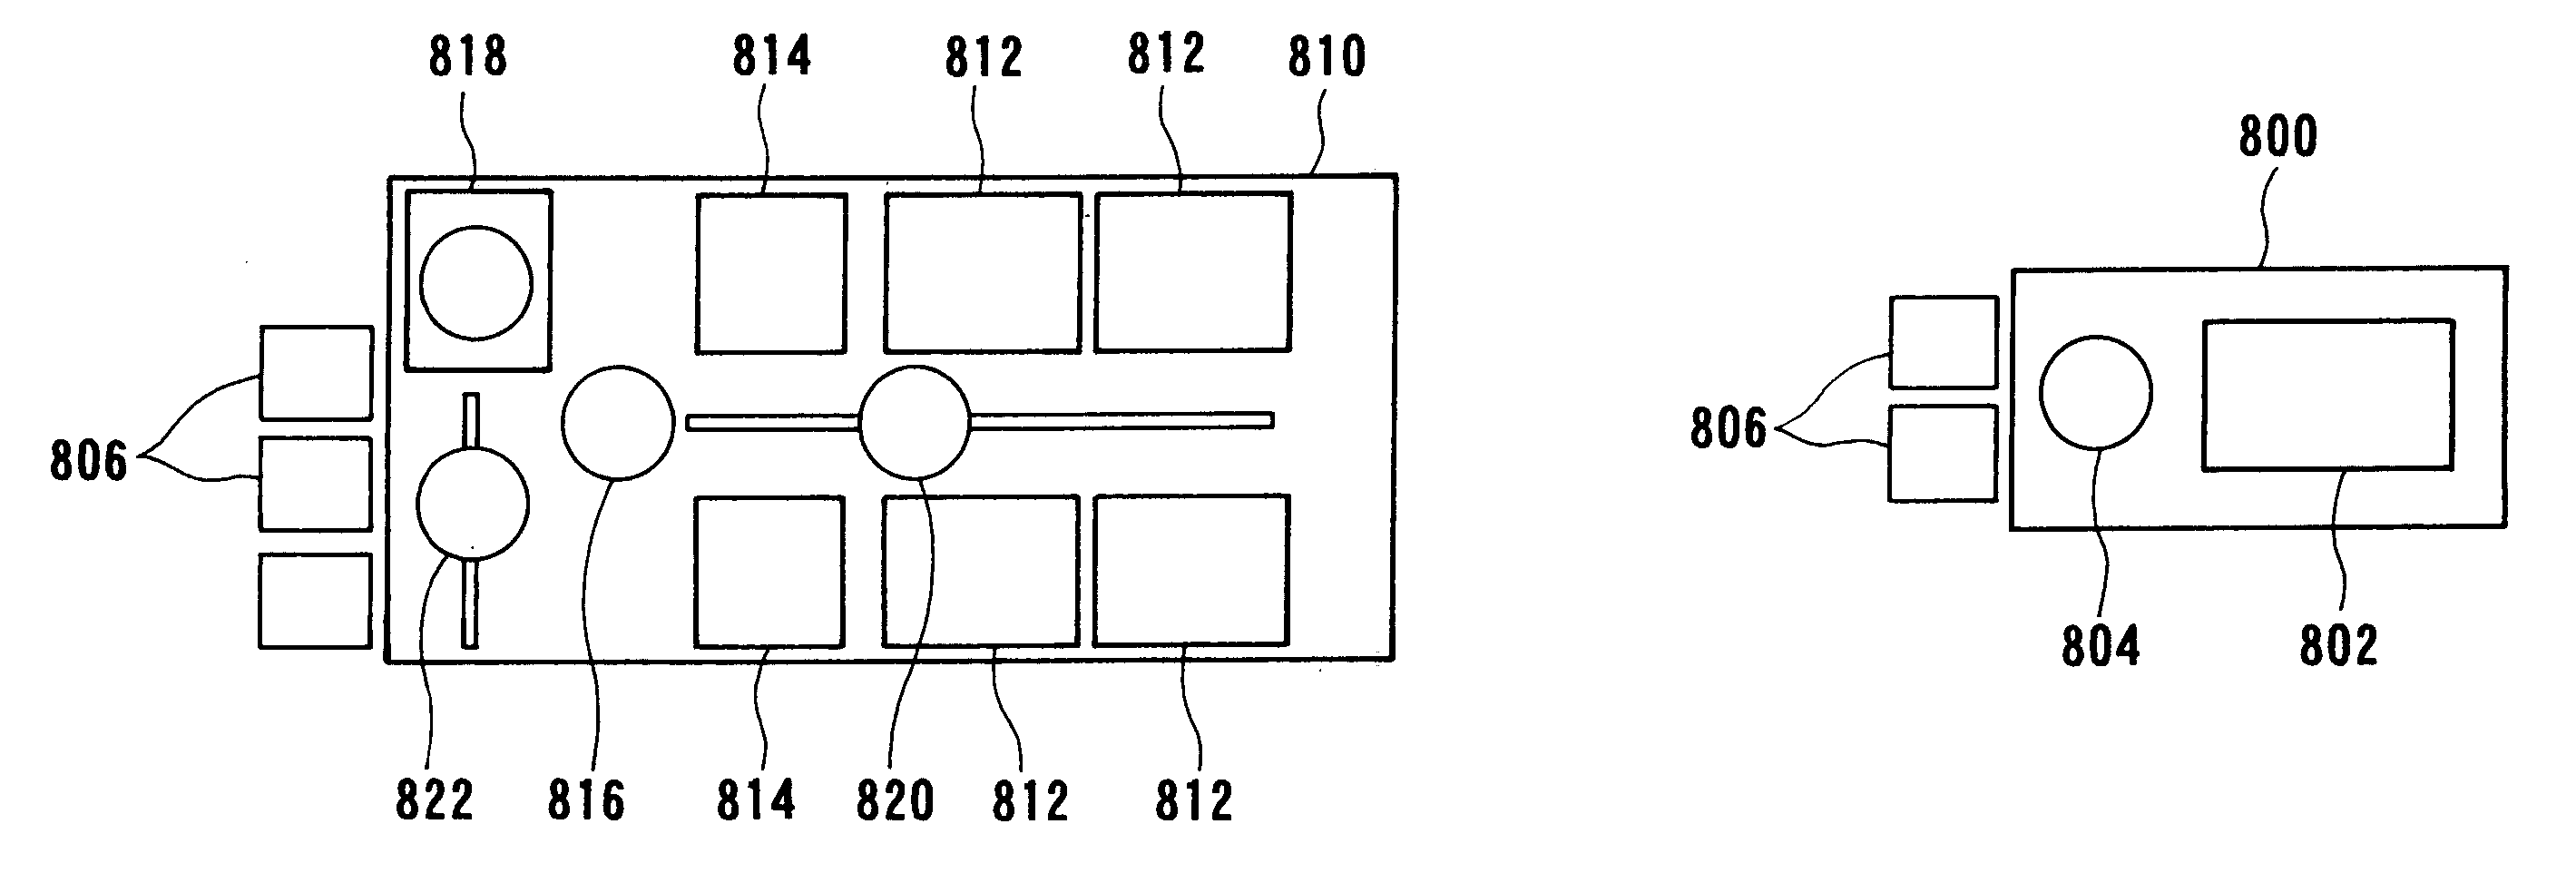 Substrate processing apparatus